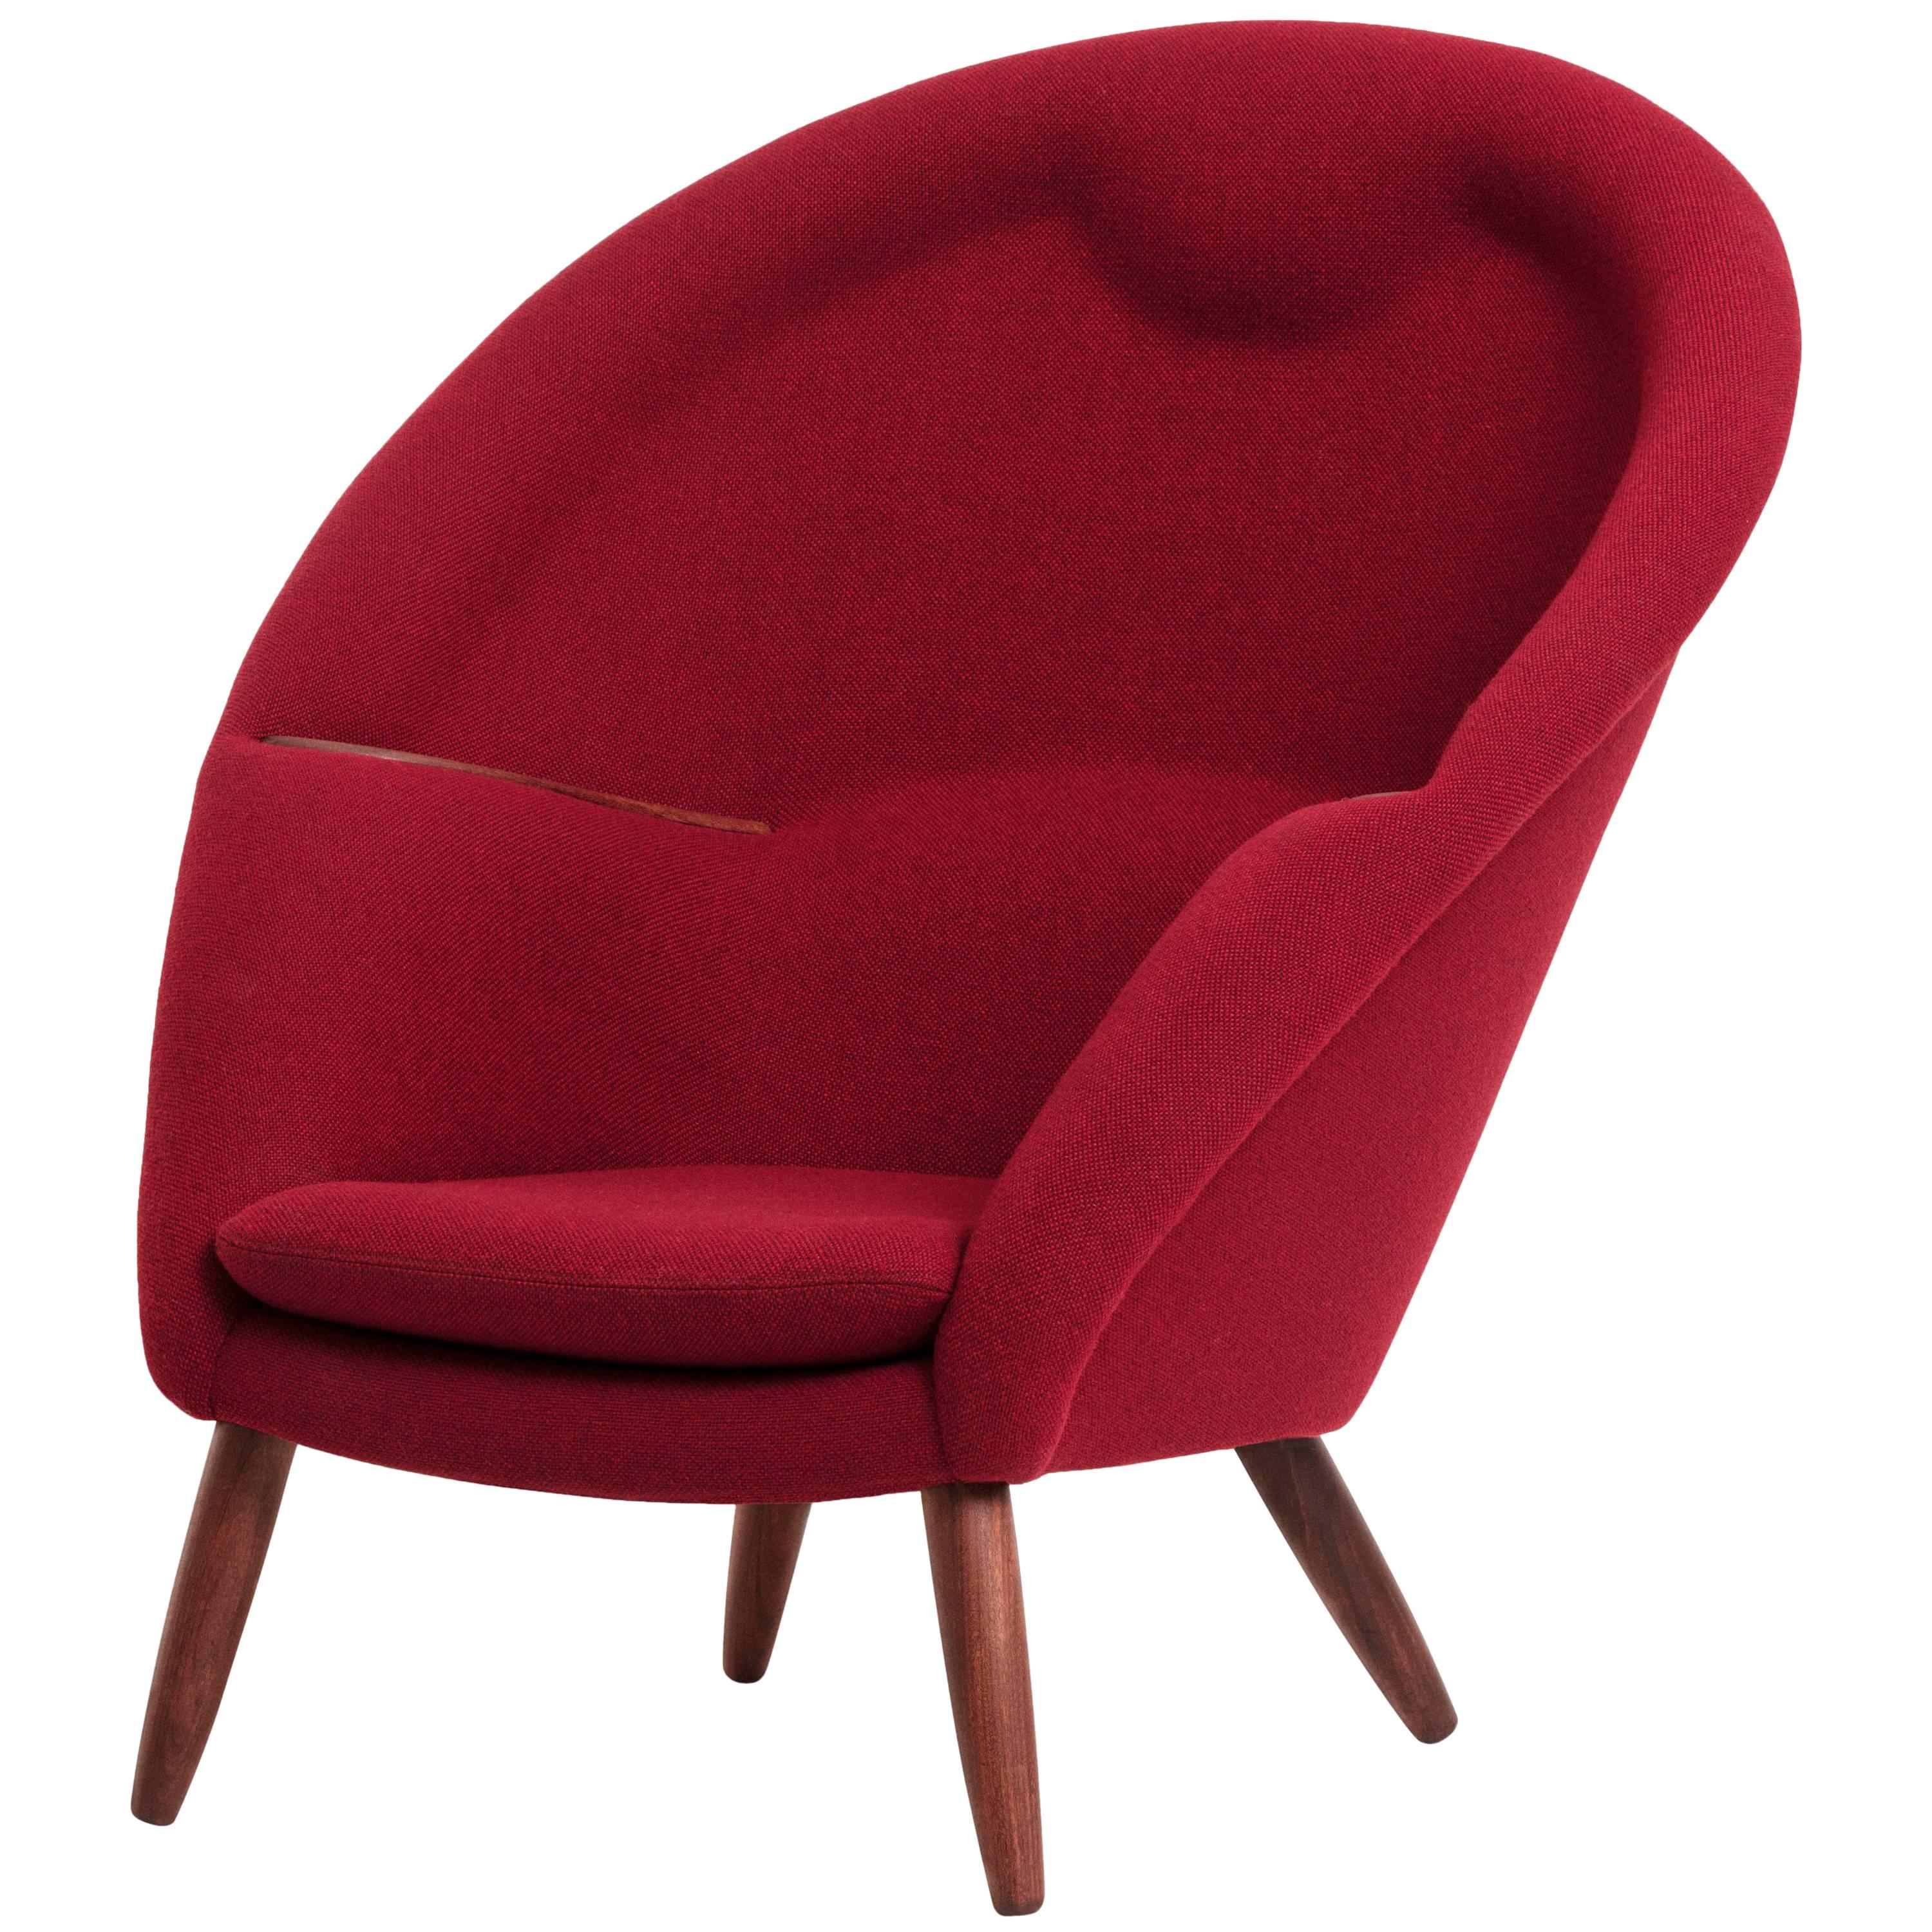 Lounge Chair Designed by Nanna and Jørgen Ditzel in 1956, Danish Produced 1950s For Sale